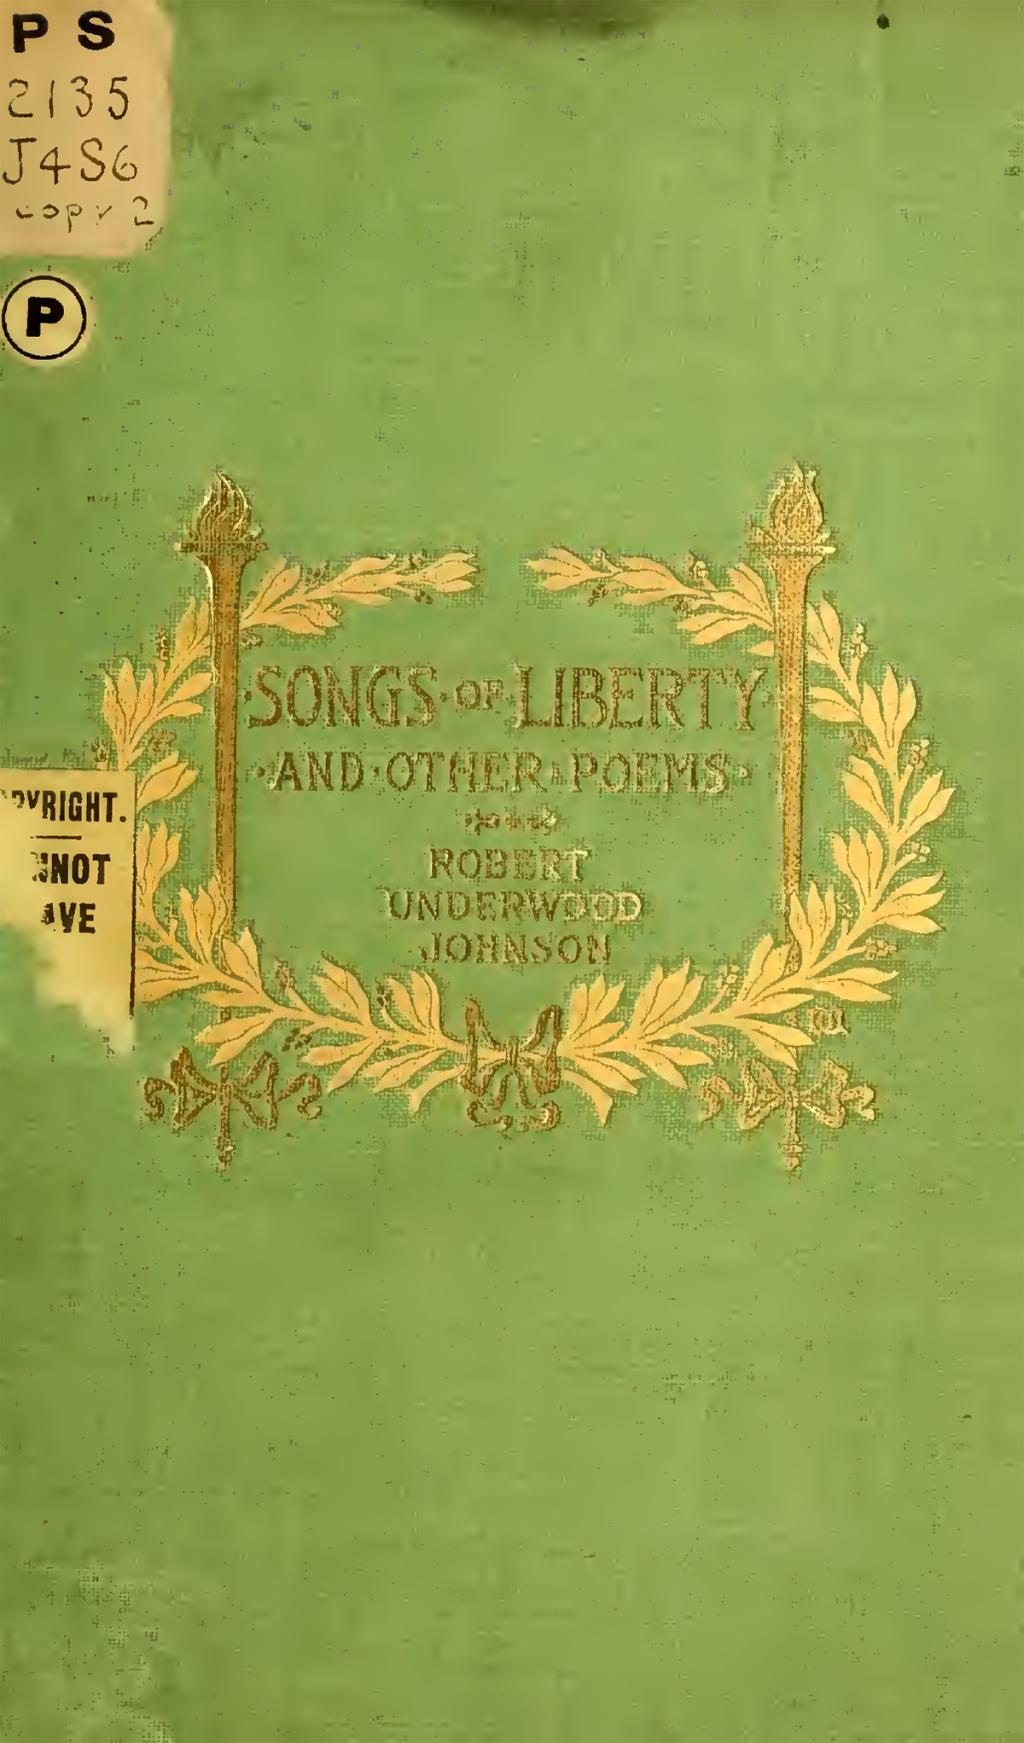 Songs of Liberty and Other Poems - Original cover.